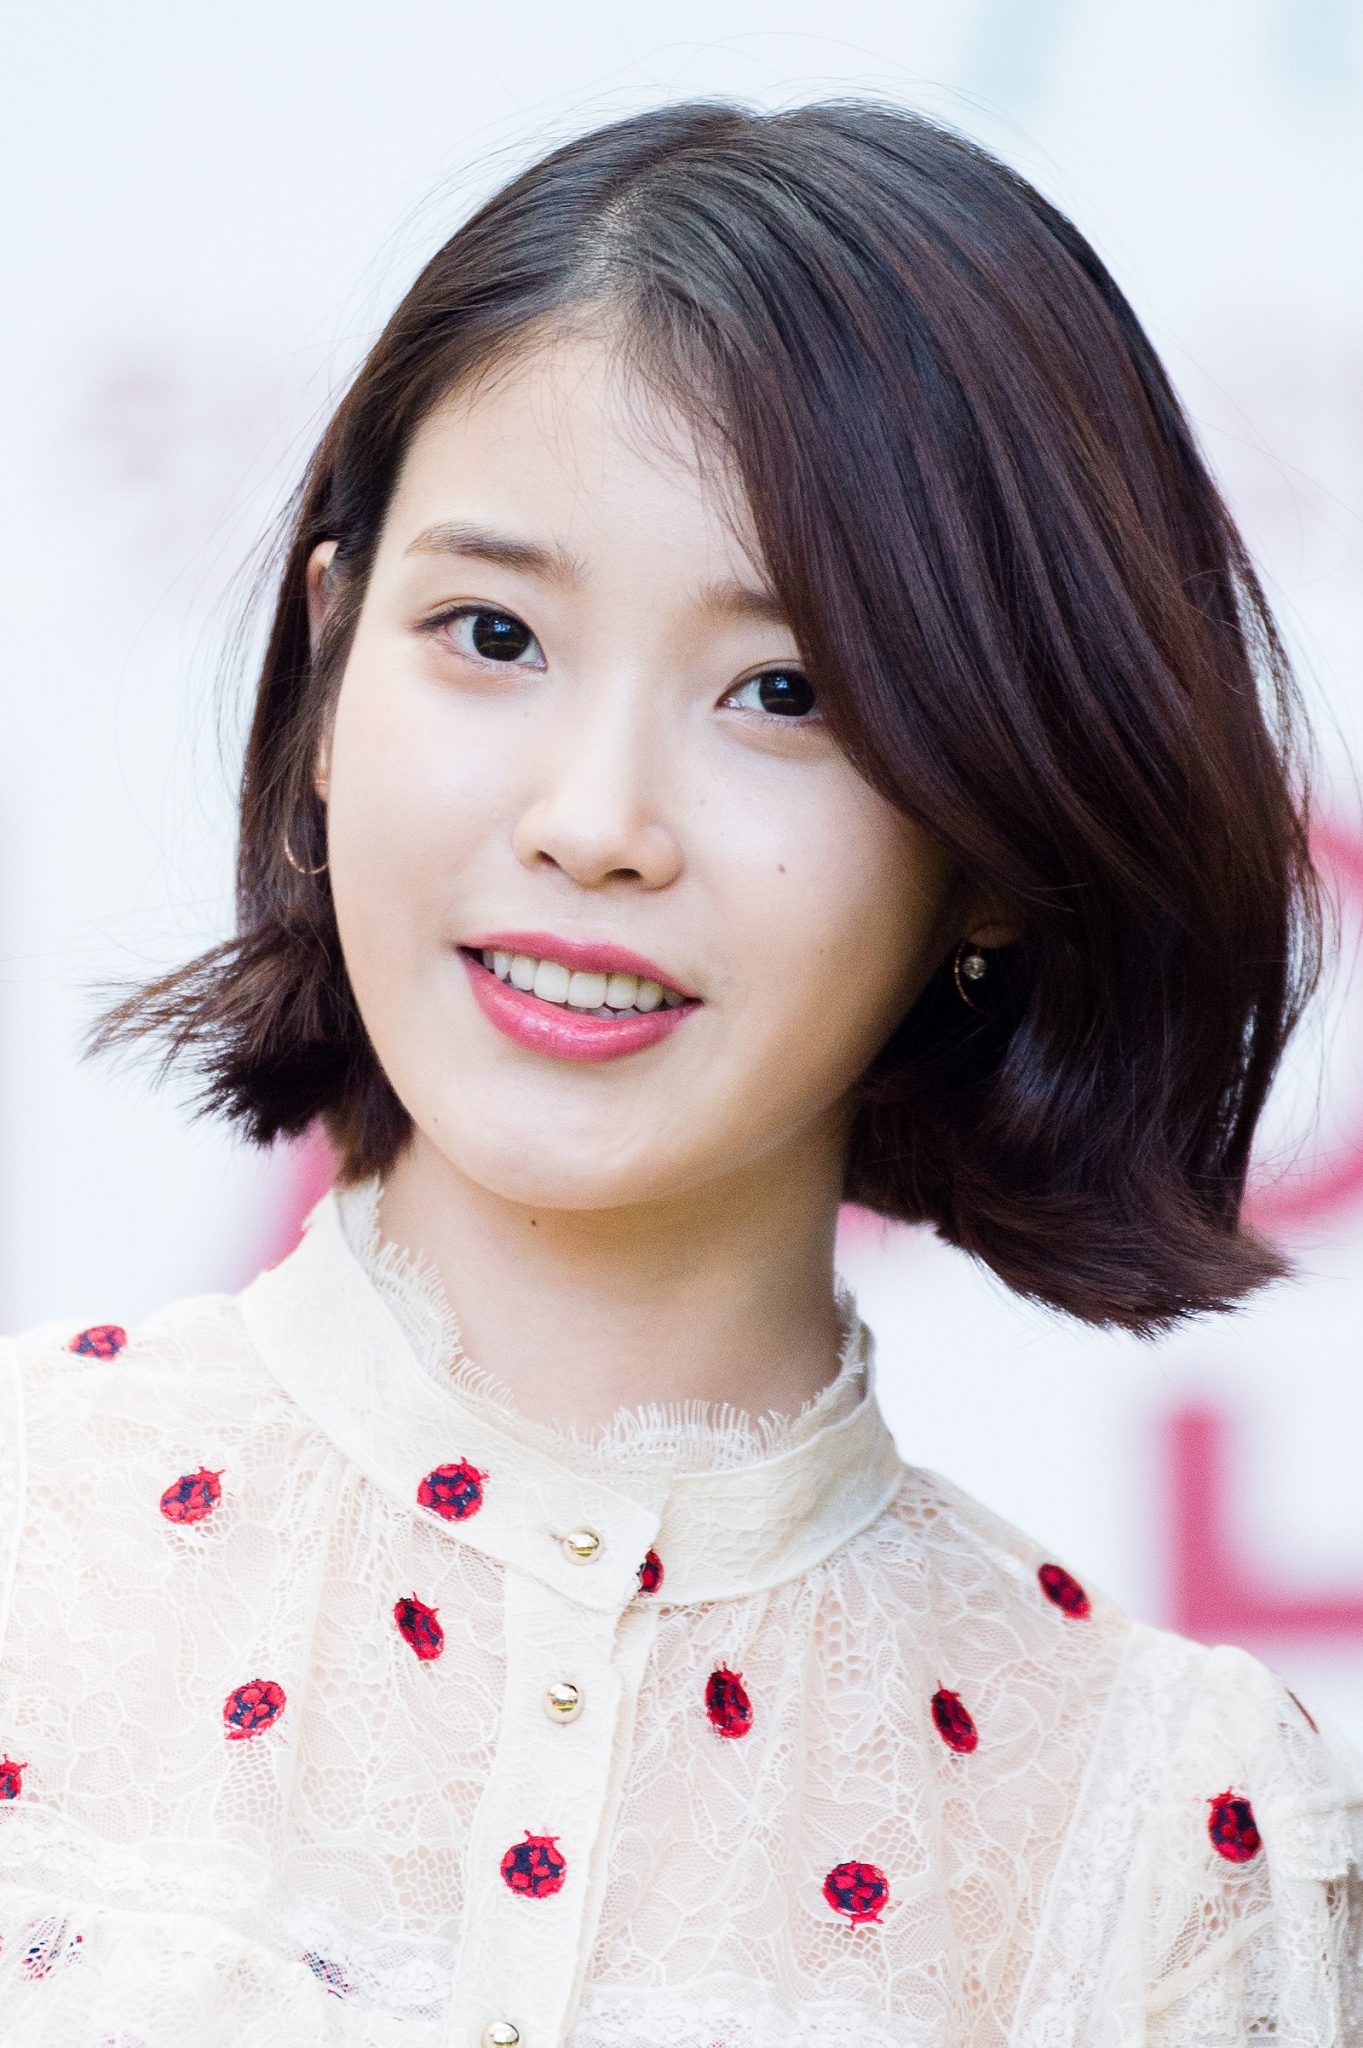 Singer IU, donation to celebrate the release of 5th album